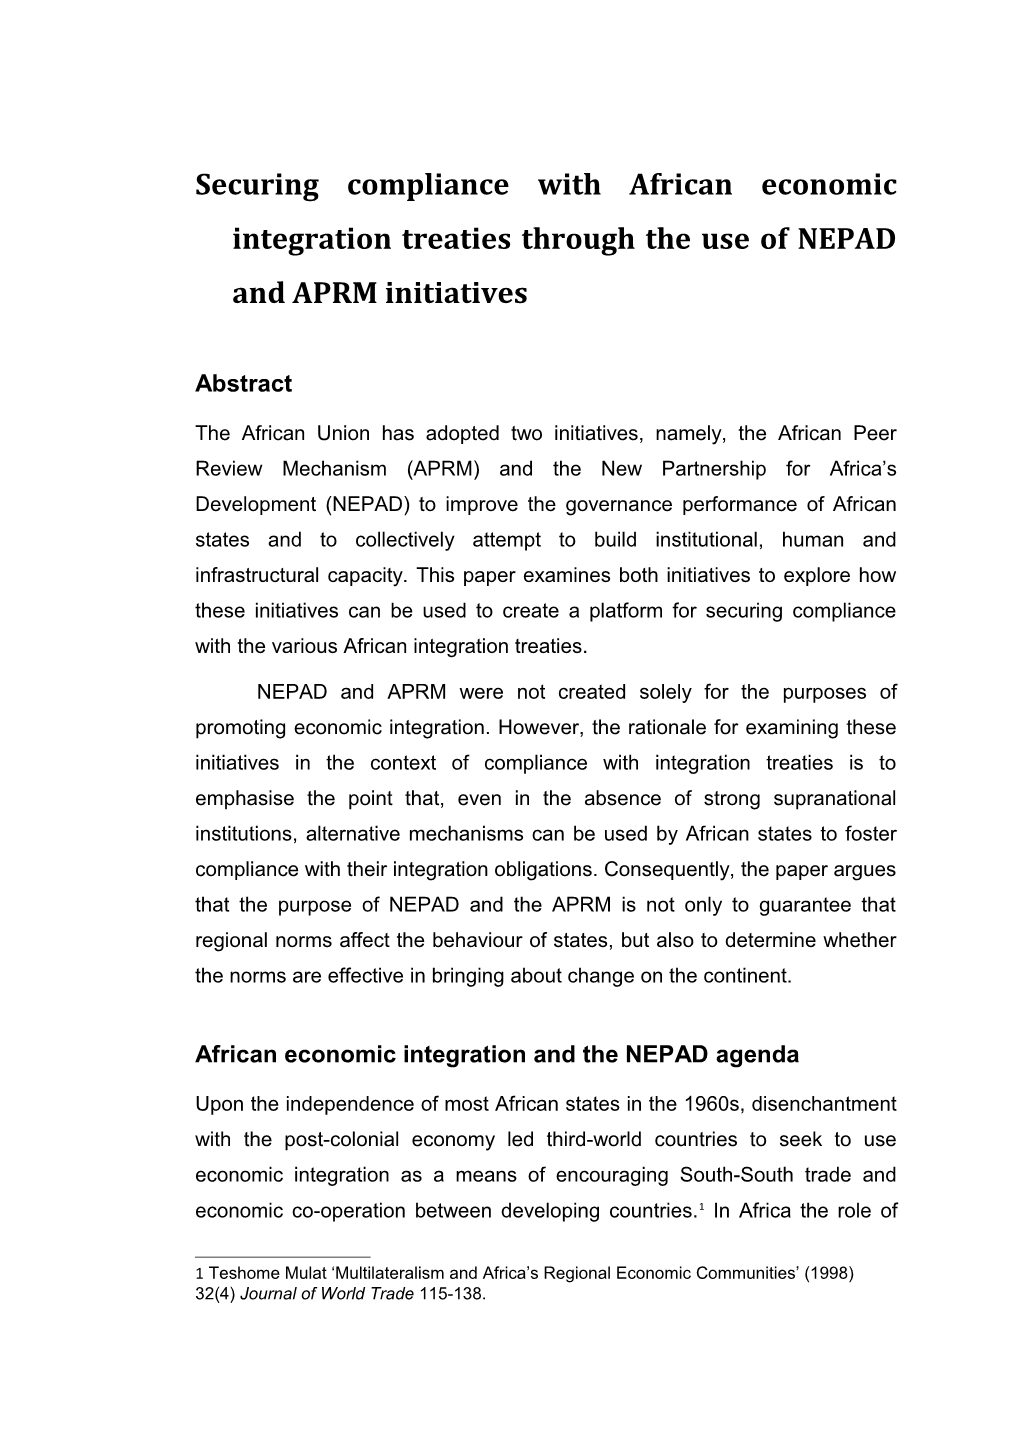 African Economic Integration and the NEPAD Agenda